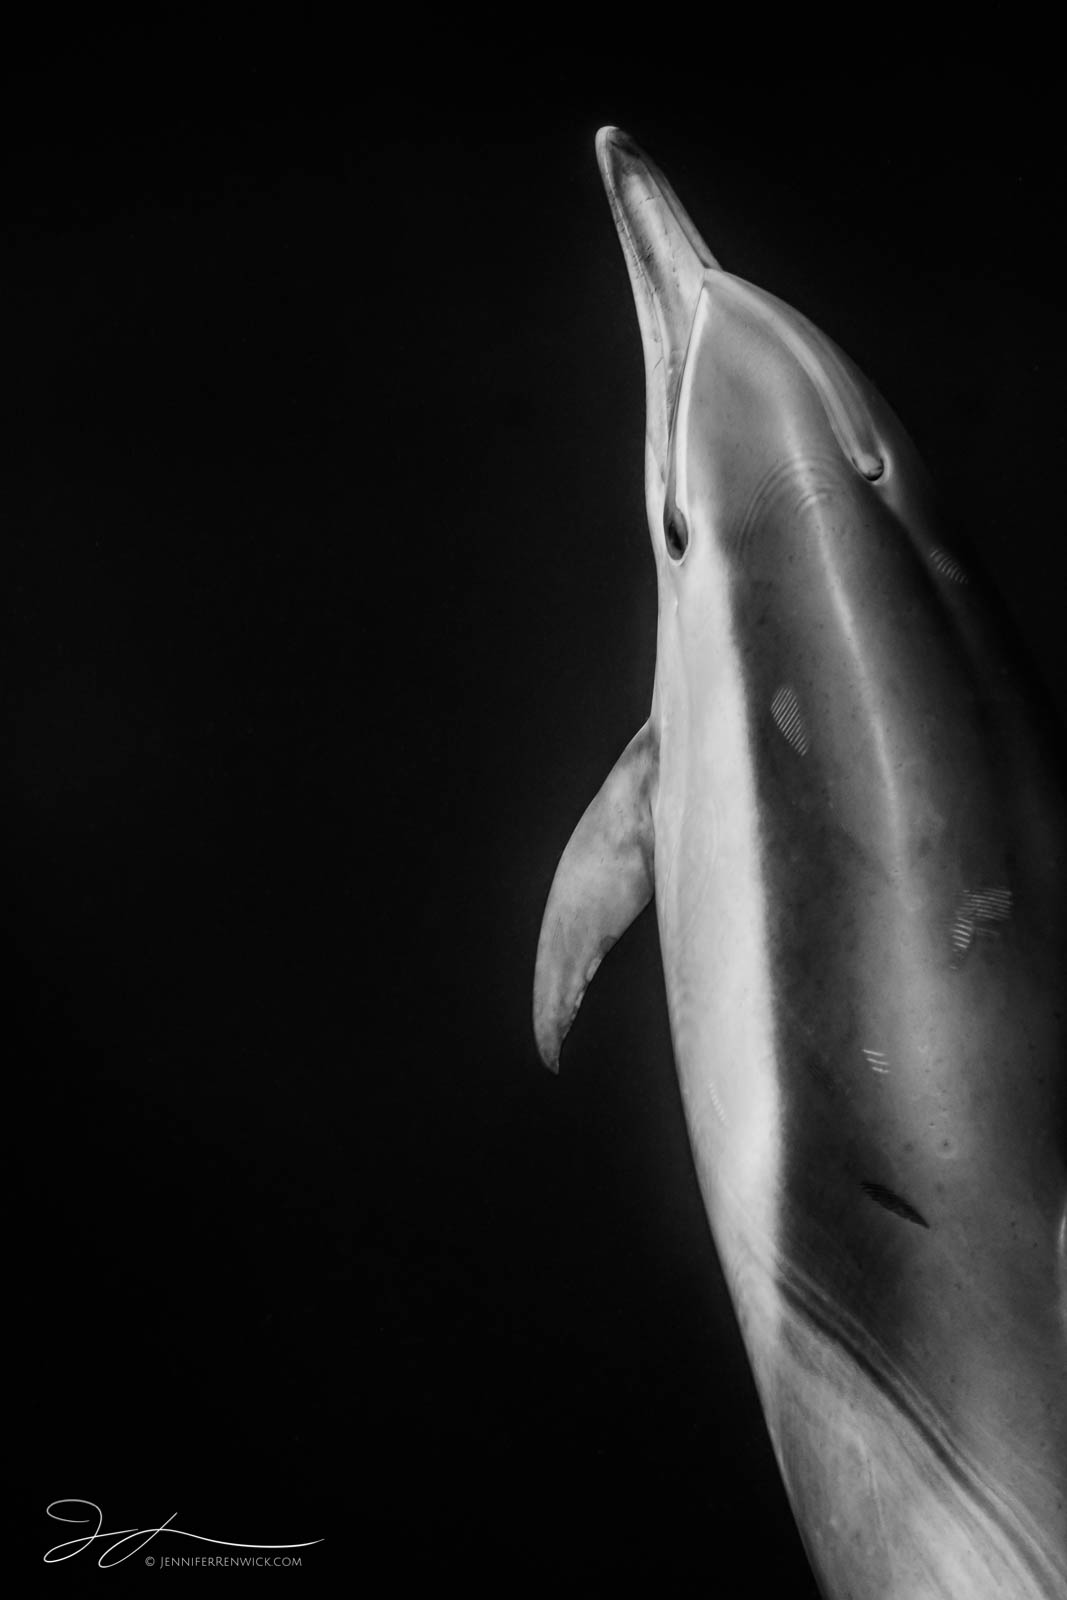 A close-up of a dolphin reveals scars and teeth rake marks left behind from other dolphins. Dolphins have scars just like we...